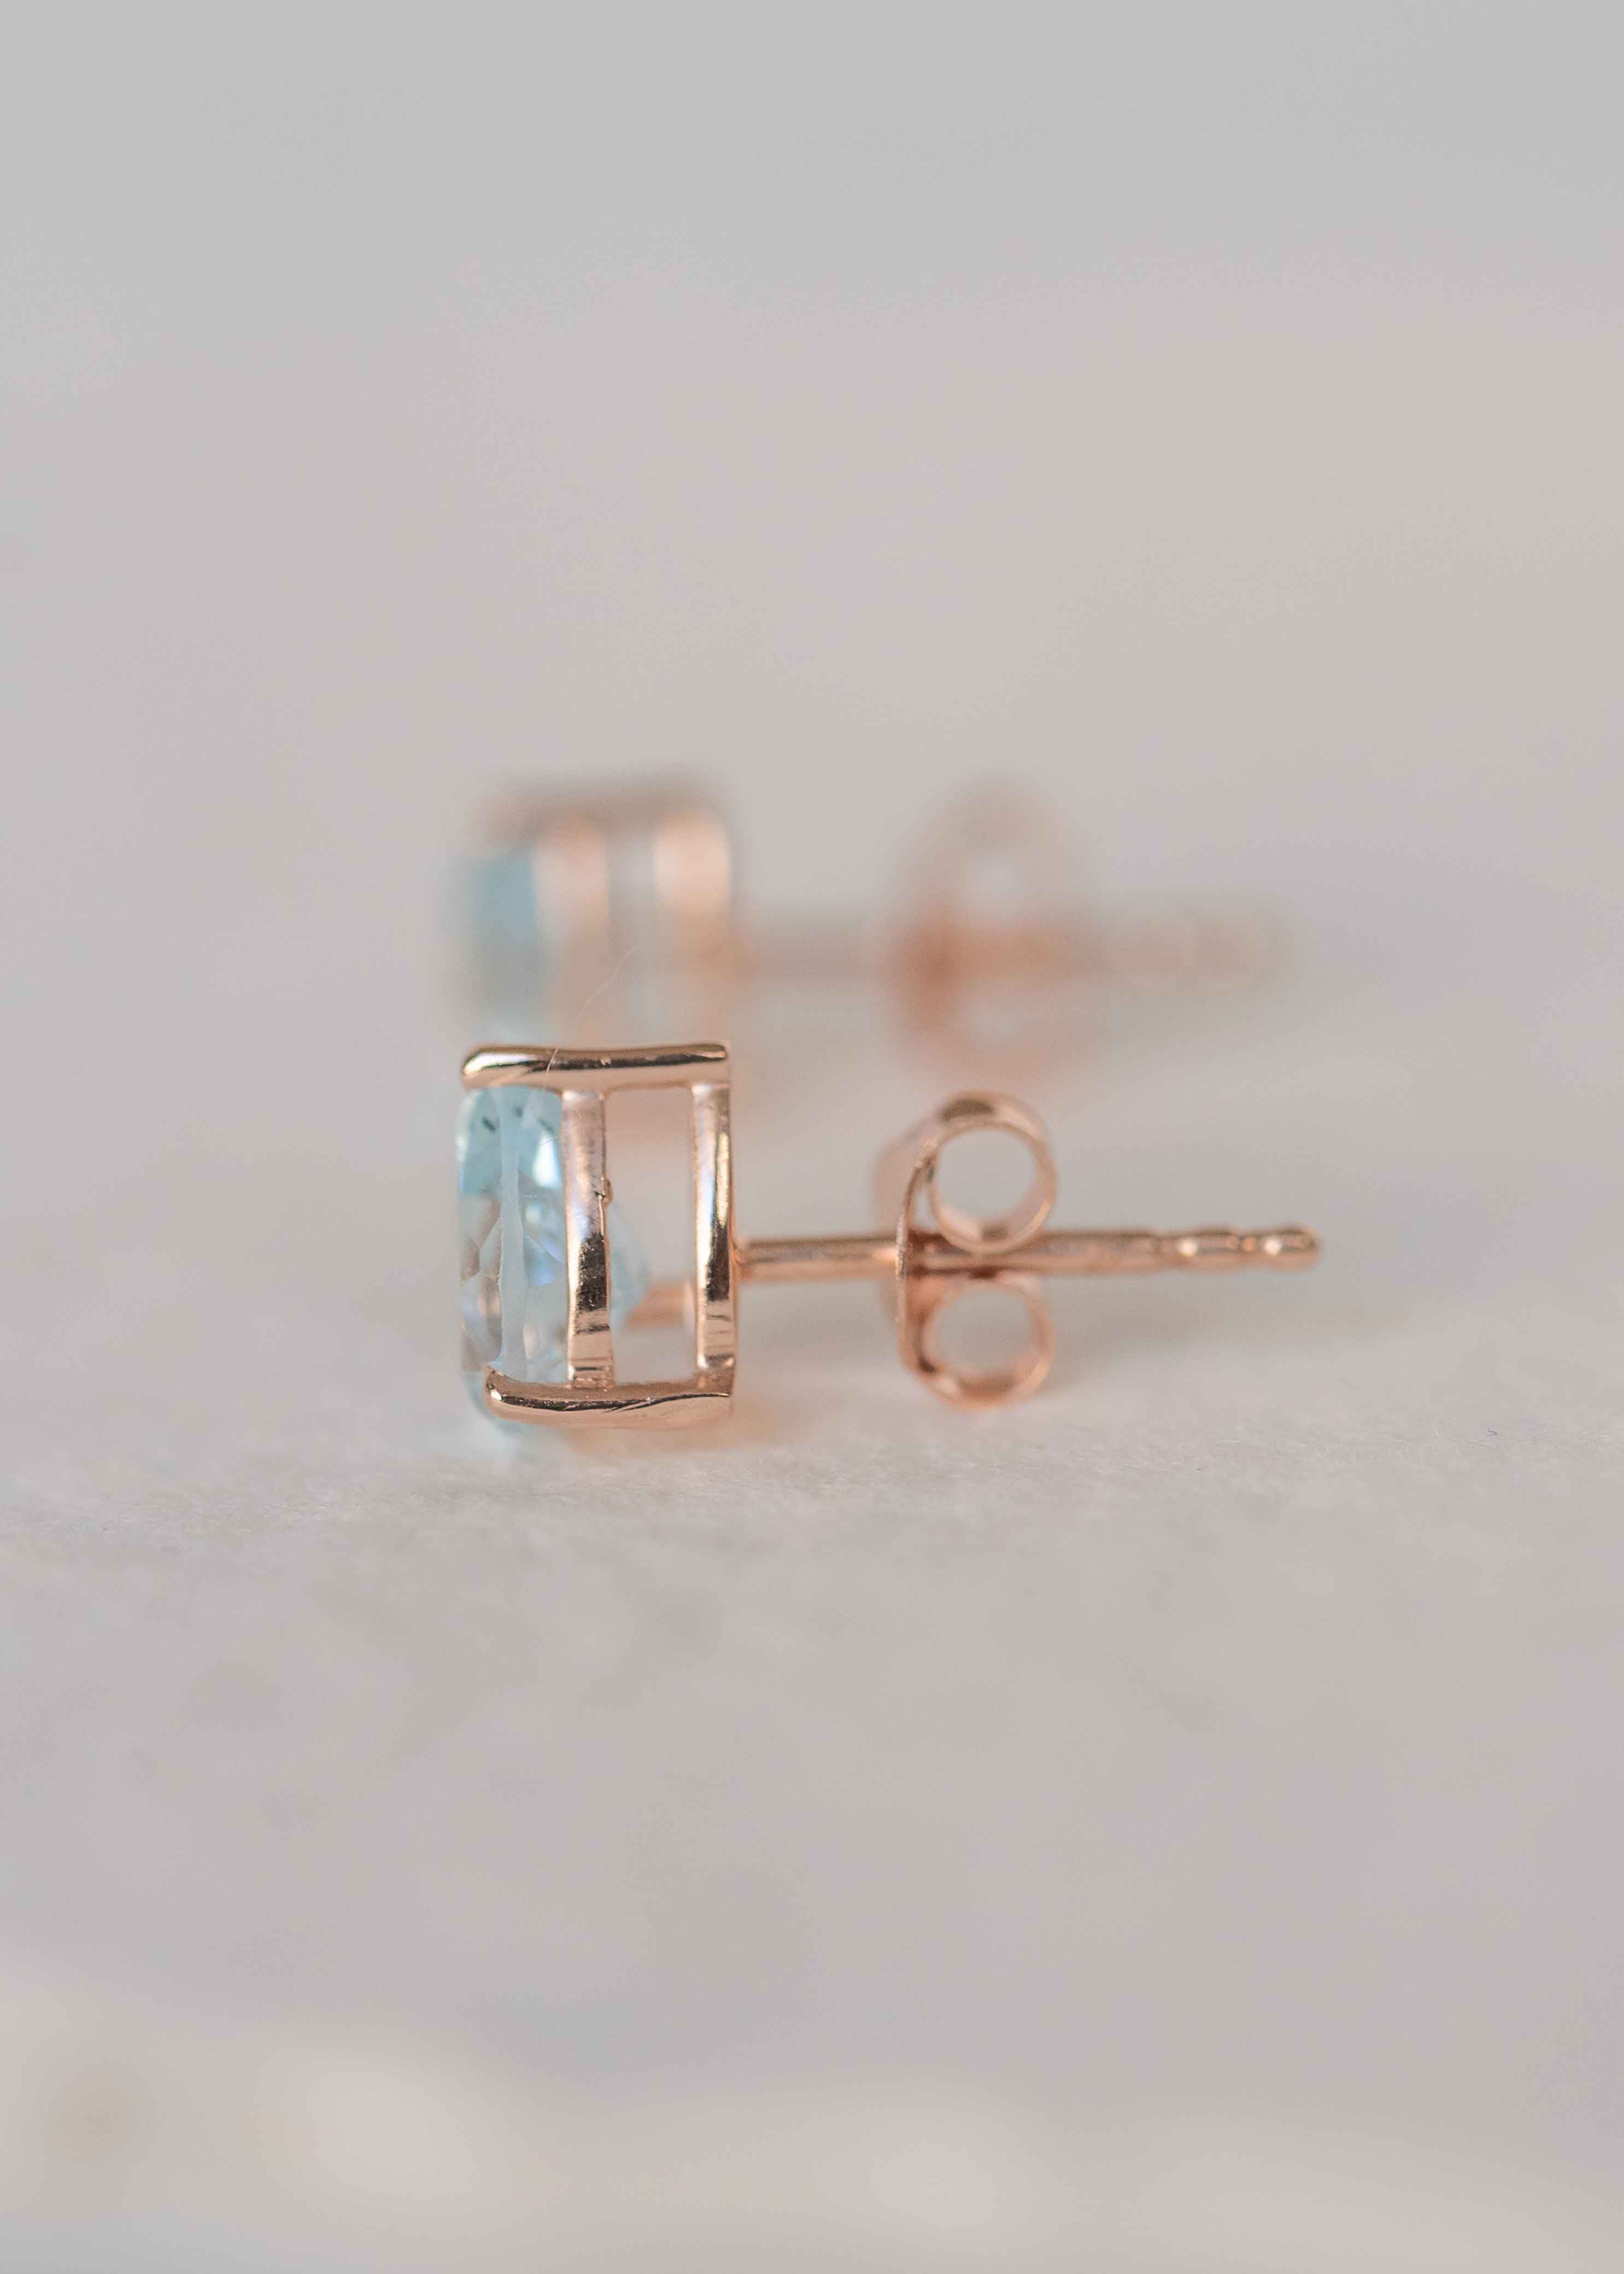 Blue Topaz Stud Earrings Second Piercing Cartilage gifts for girls bff girlfriends